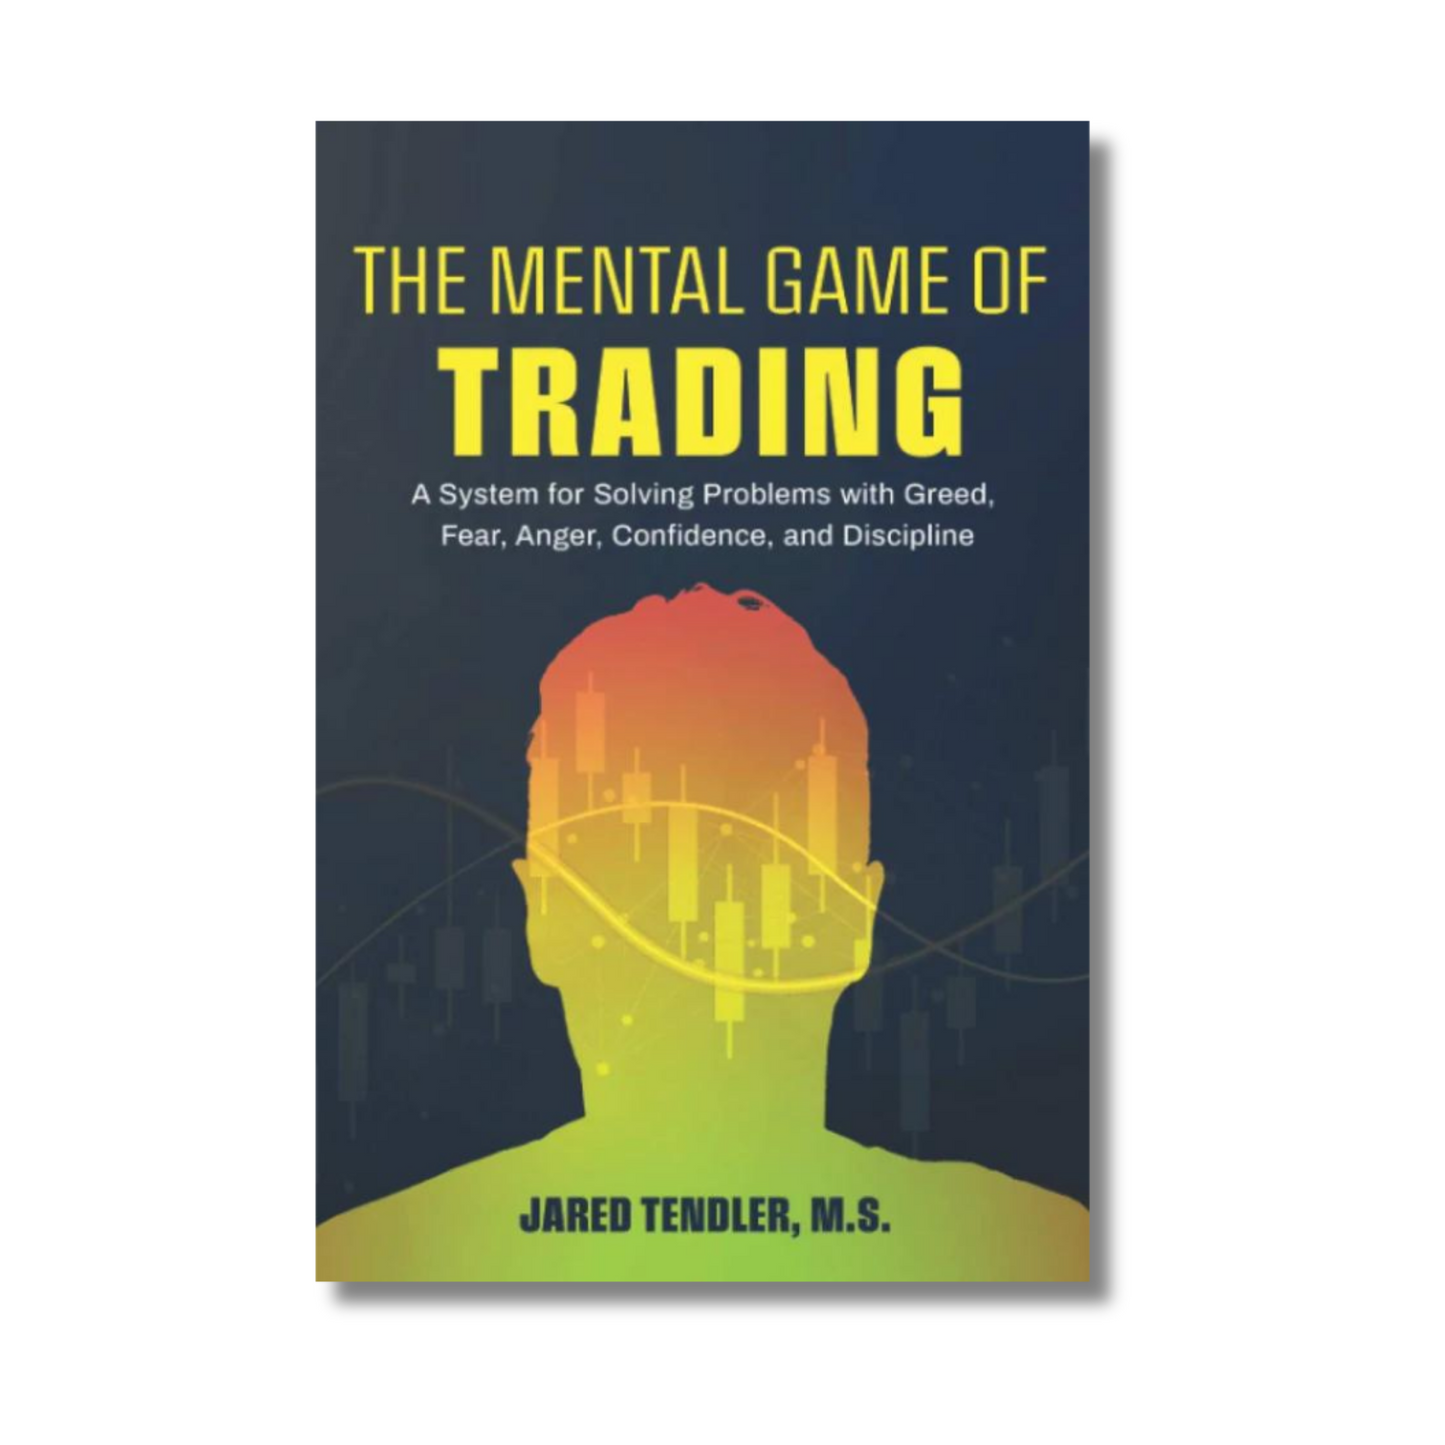 The Mental Game of Trading By Jared Tendler (Paperback)